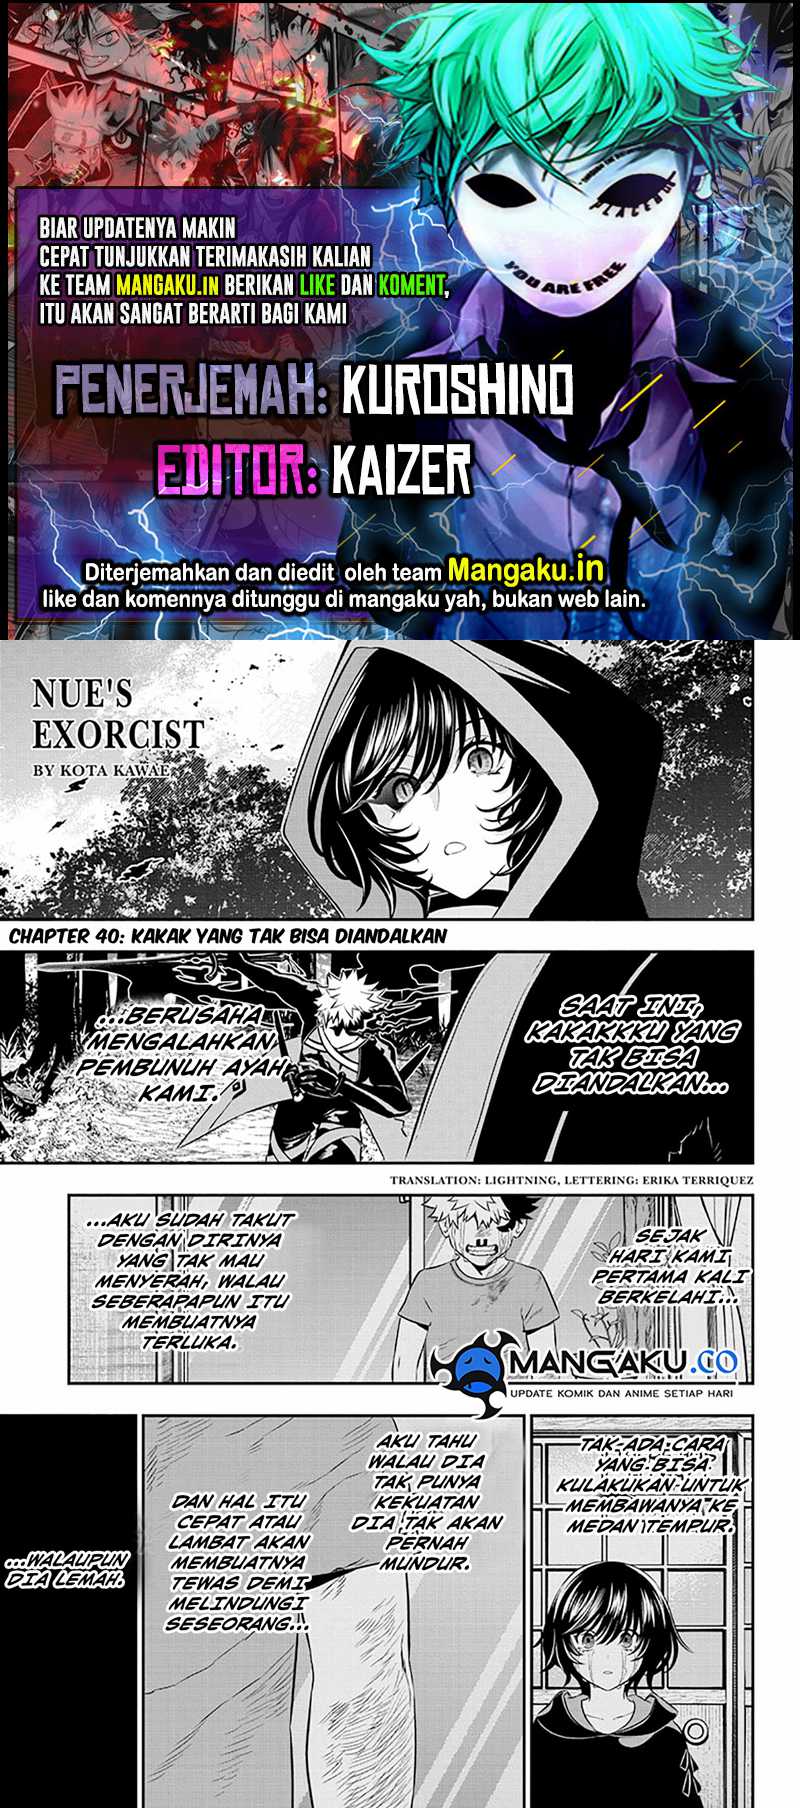 Nue’s Exorcist Chapter 40